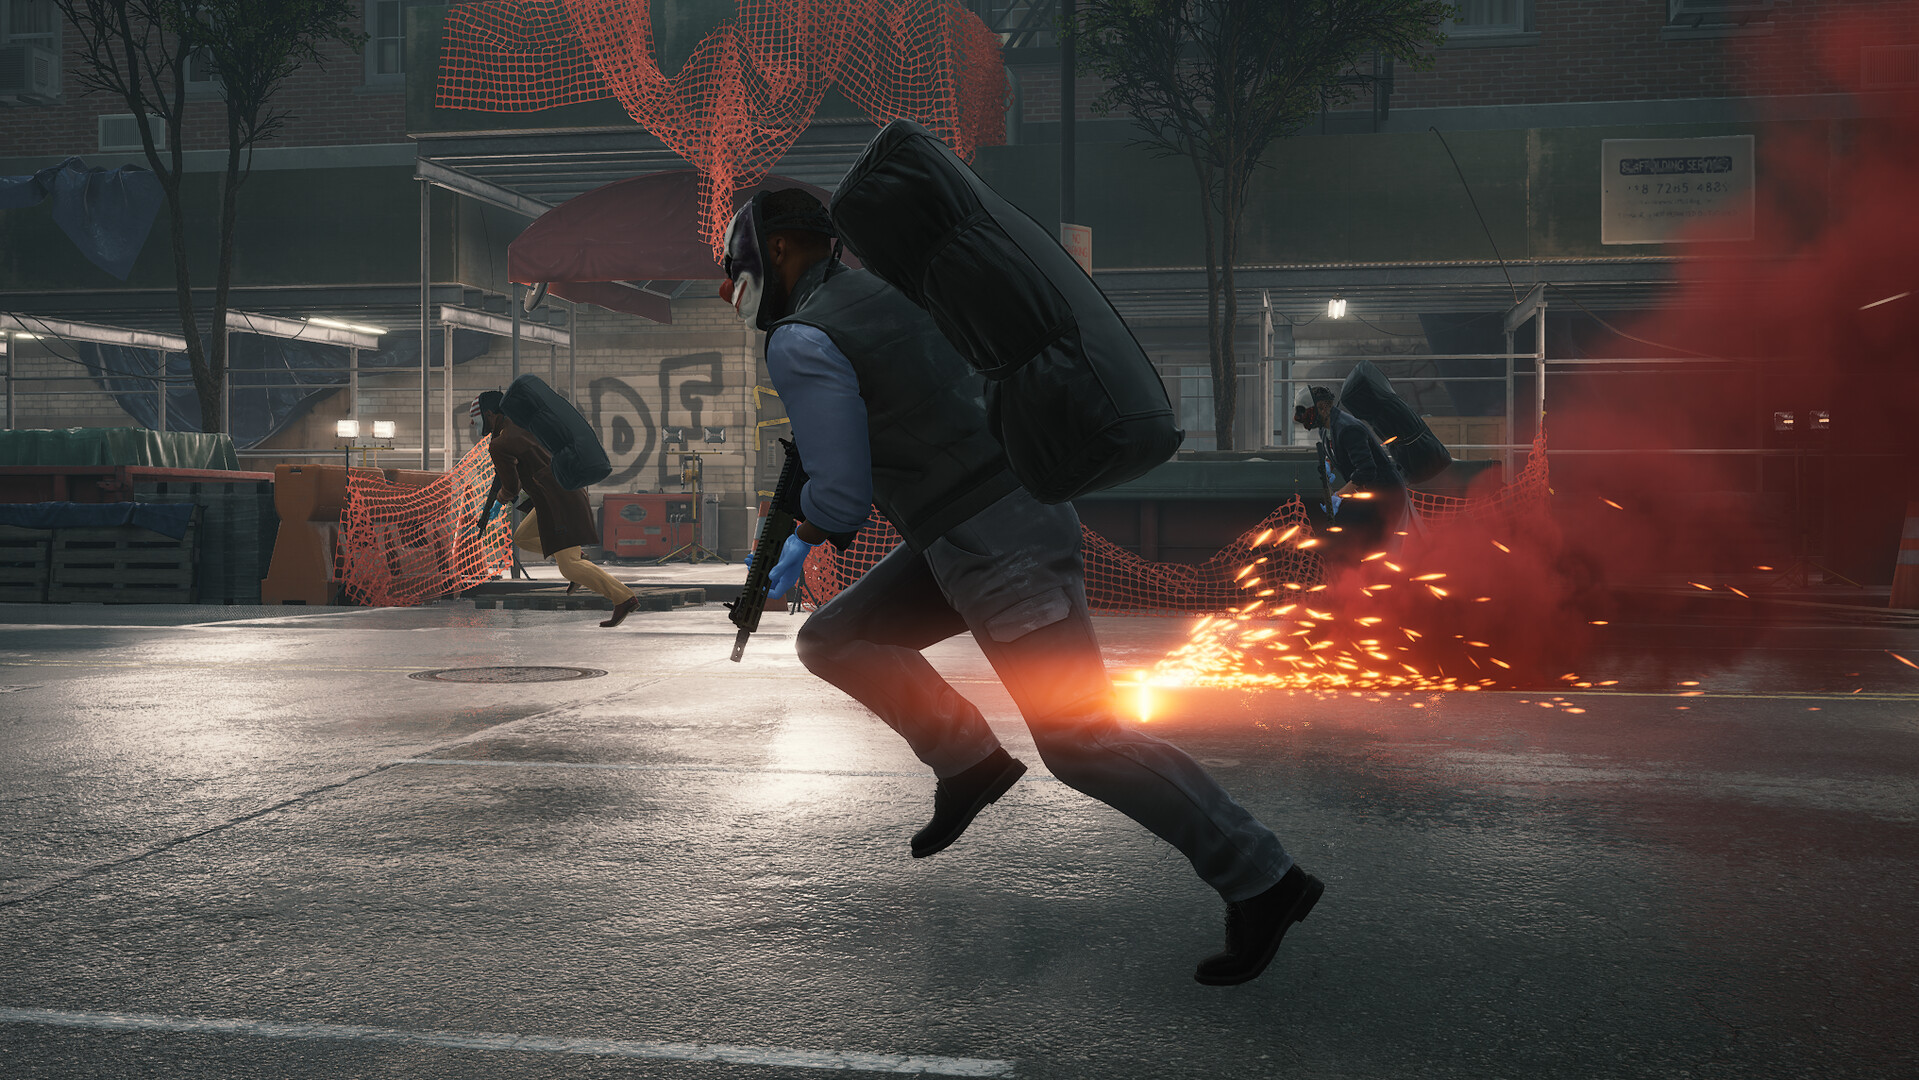 Starbreeze Finally Rolls Out Payday 3 Patch 1.0.1 After Multiple Delays -  GameBaba Universe